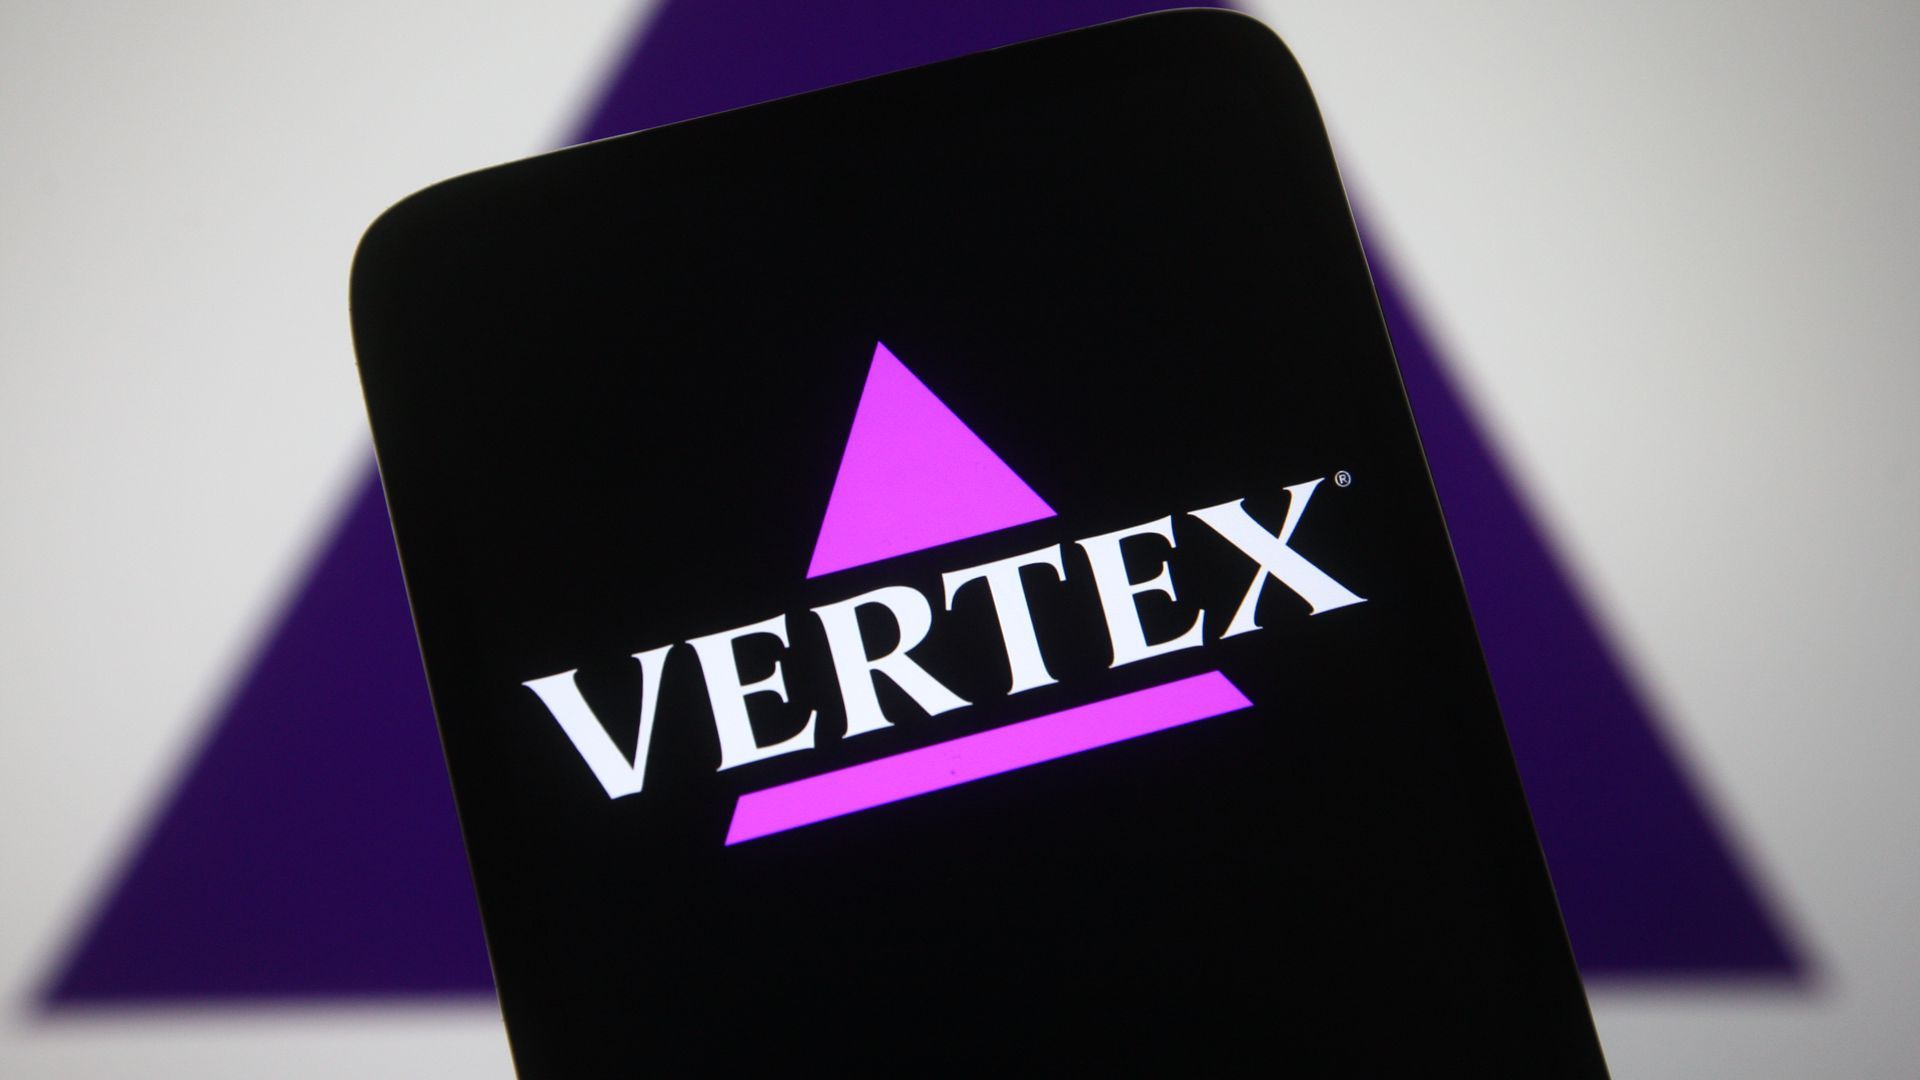 A photo illustration showing the Vertex logo on a smartphone.